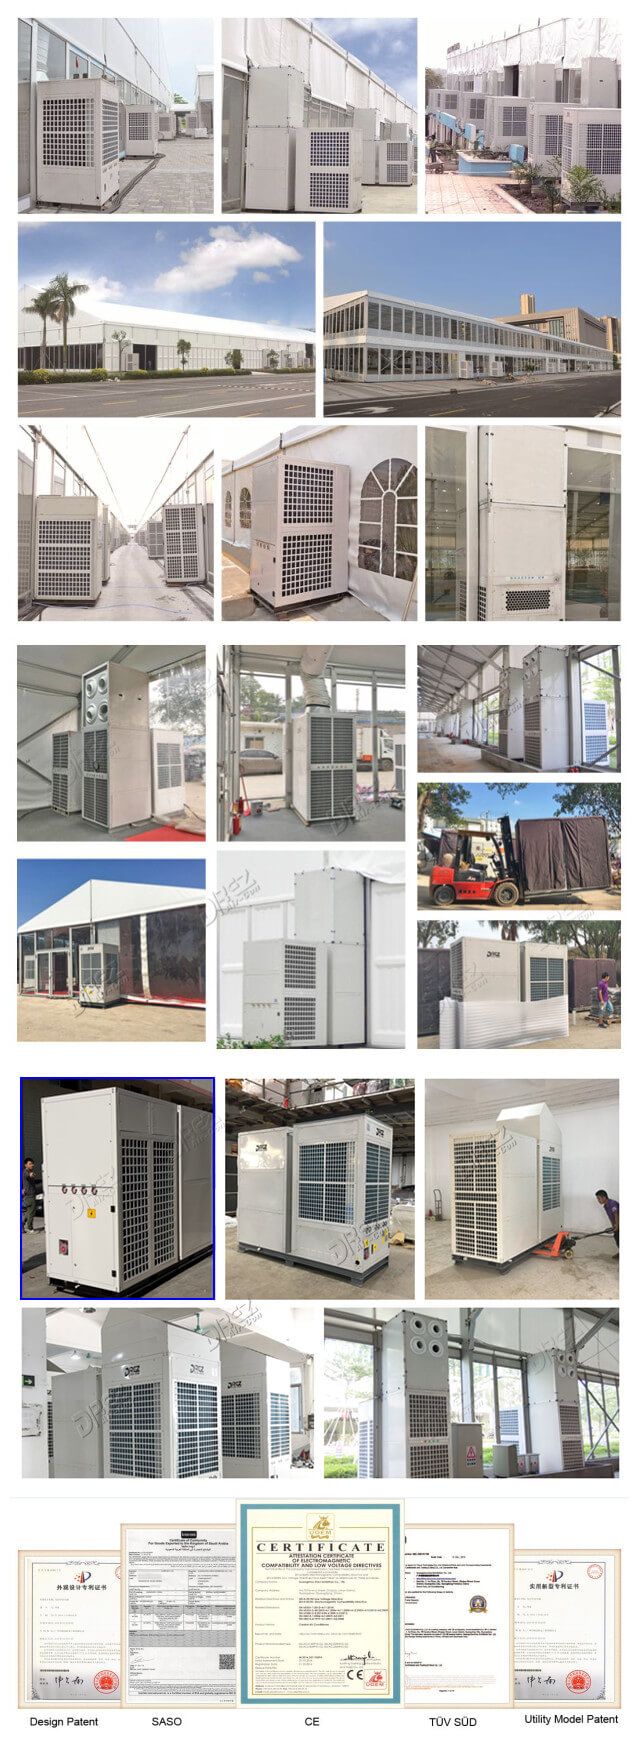 10hp 9 Ton High Efficient 108000btu Wedding Tent Air Conditioner Portable Air Cooled for Outdoor Event Tent Cooling